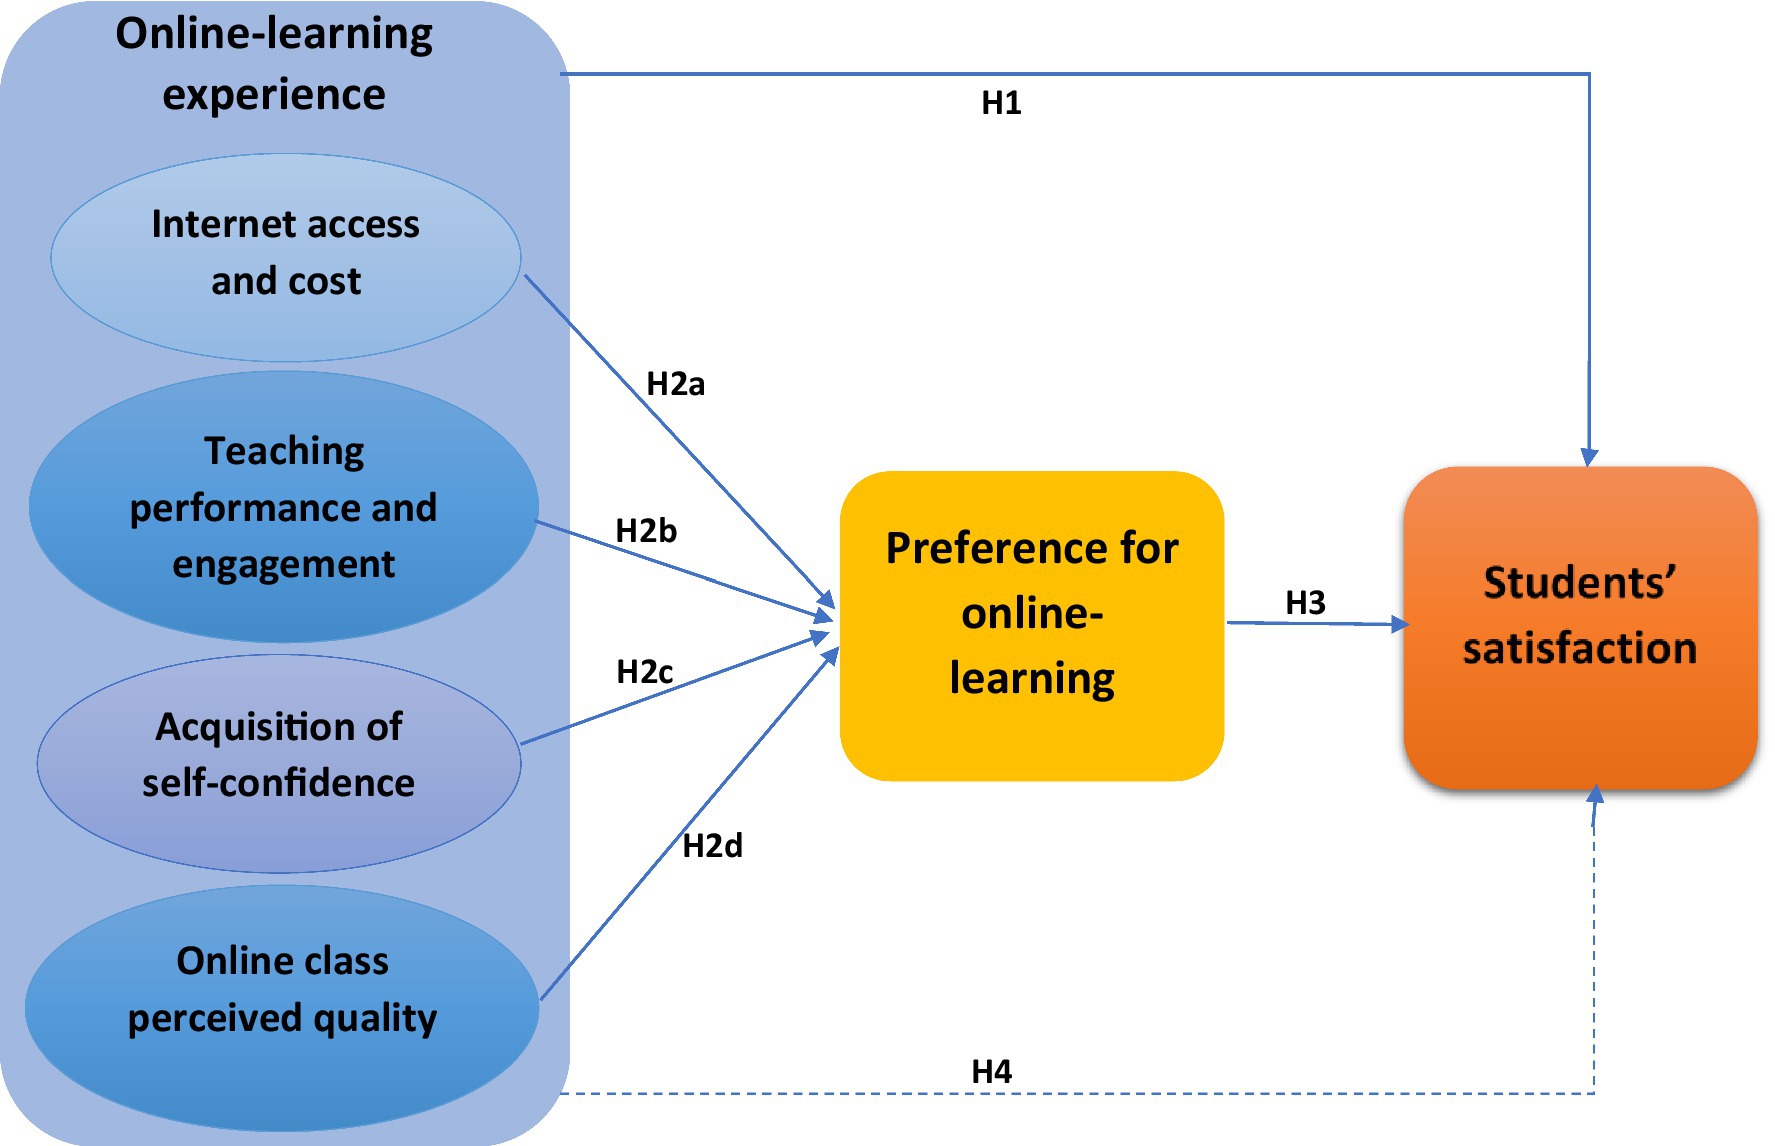 literature review on students' perception towards online education